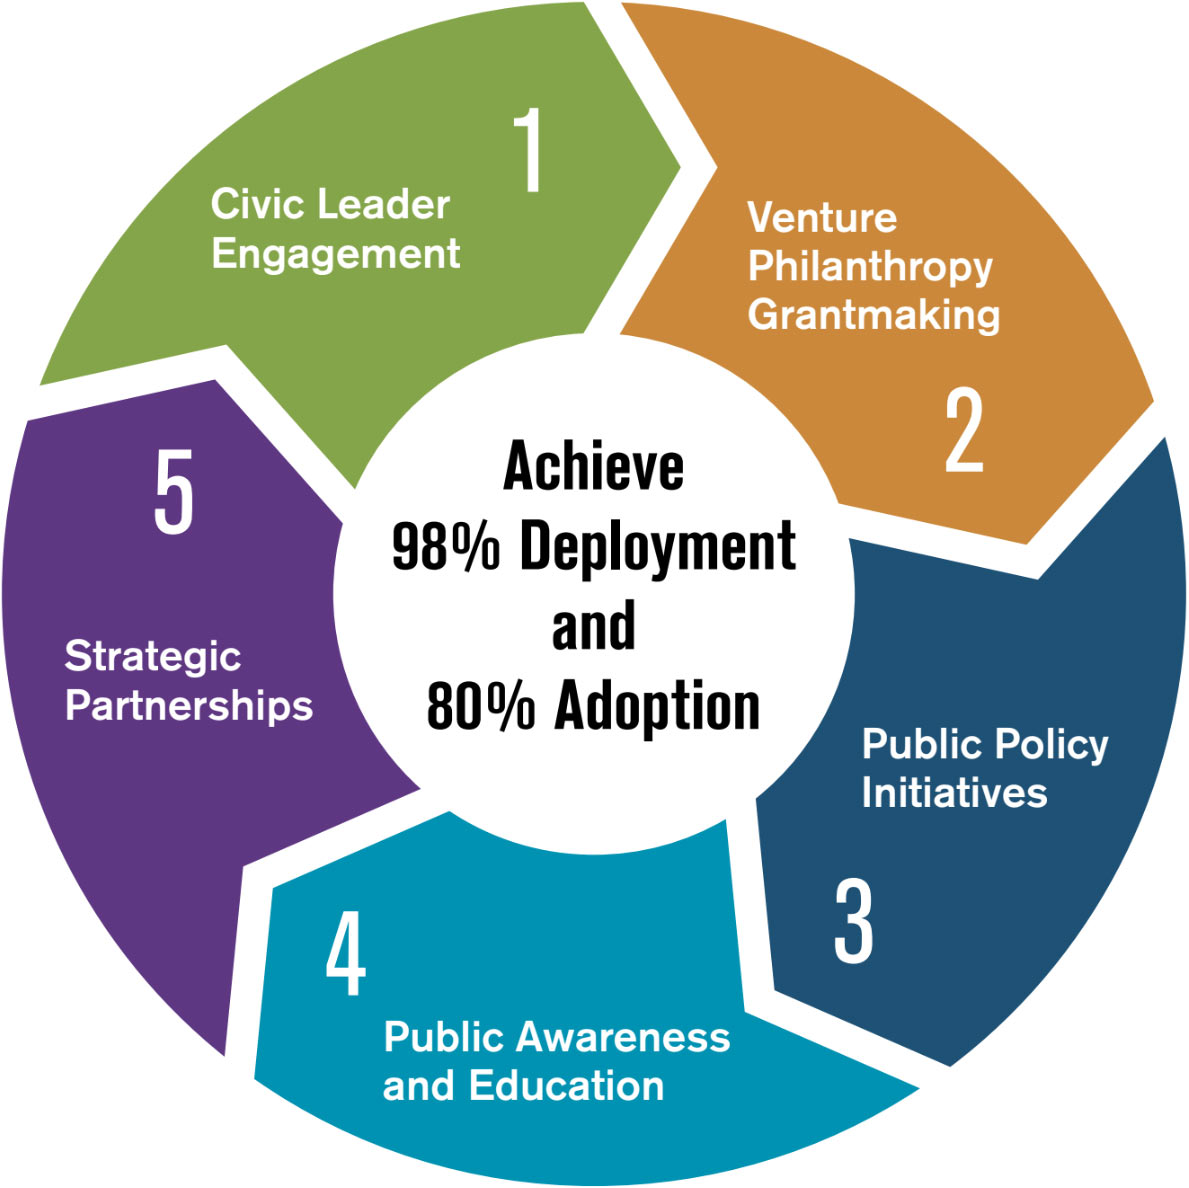 CETF pursues 5 Overarching Strategies to achieve optimal impact and a higher return on investment of the original $60 million seed capital: 1. Civic Leader Engagement; 2. Venture Philanthropy Grantmaking; 3. Public Policy Initiatives; 4. Public Awareness and Education; and 5. Strategic Partnerships.